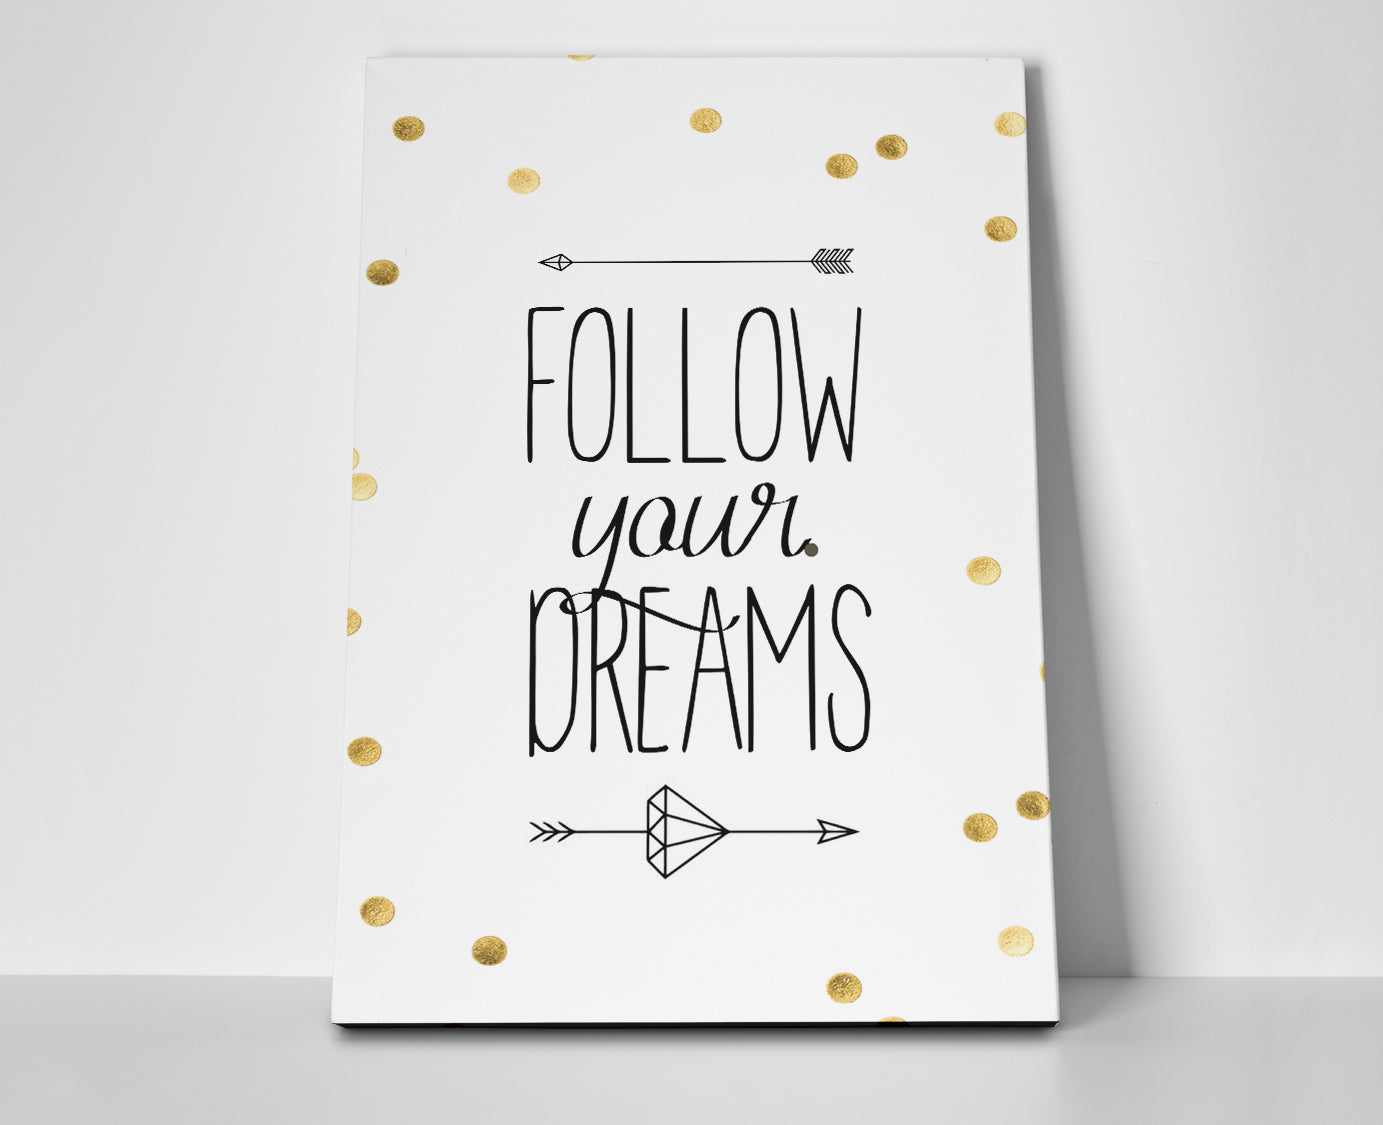 Follow Your Dreams Poster